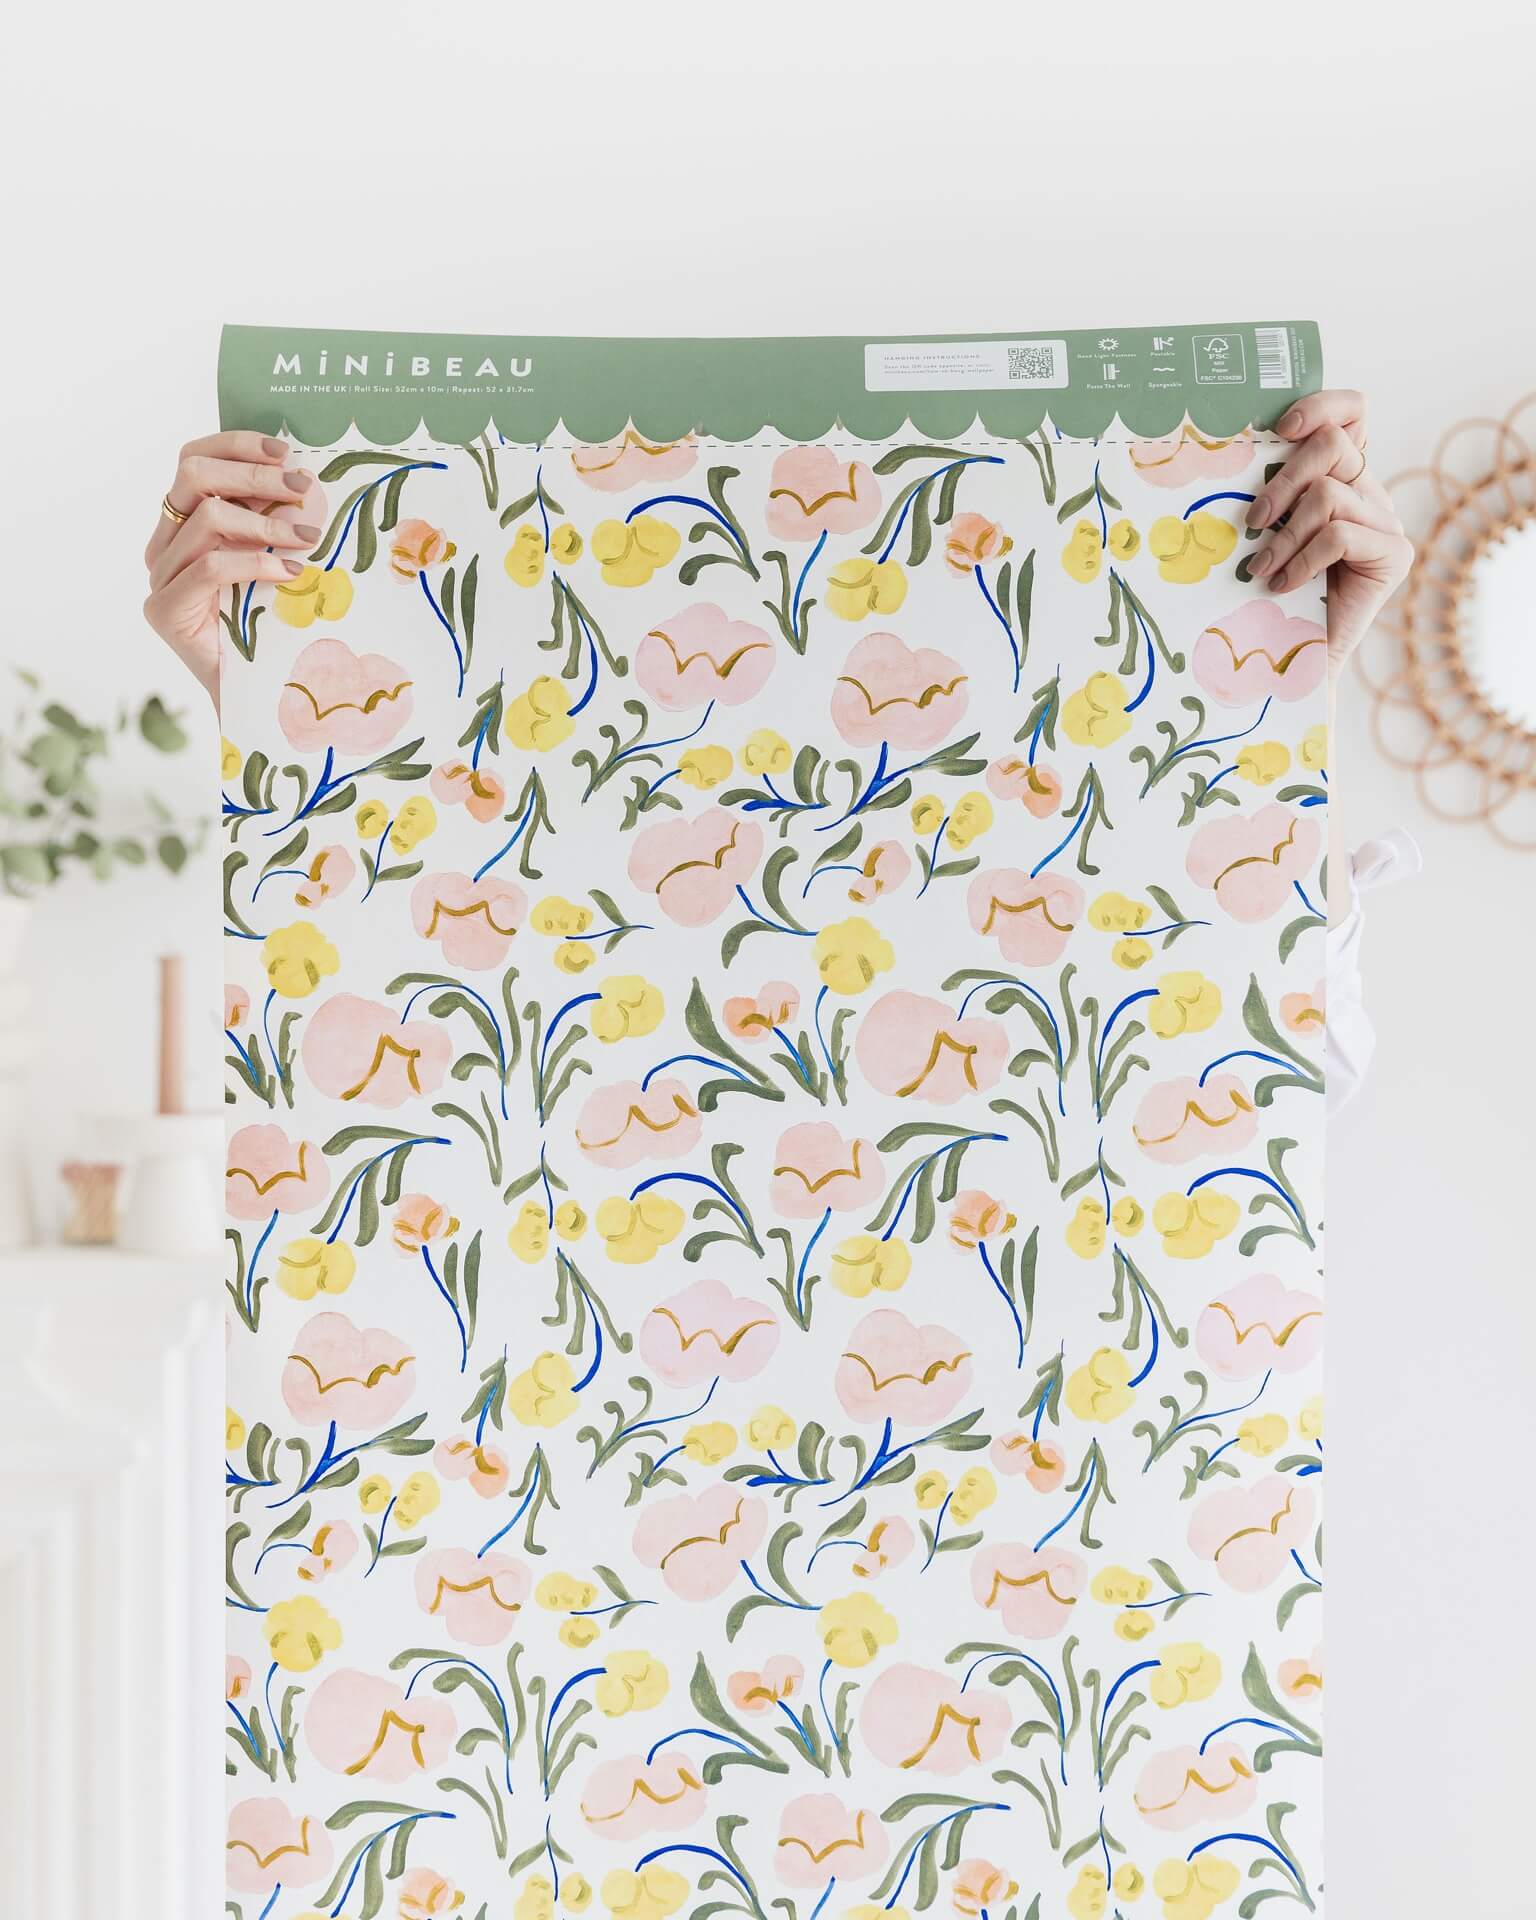  floral wallpaper by Minibeau.